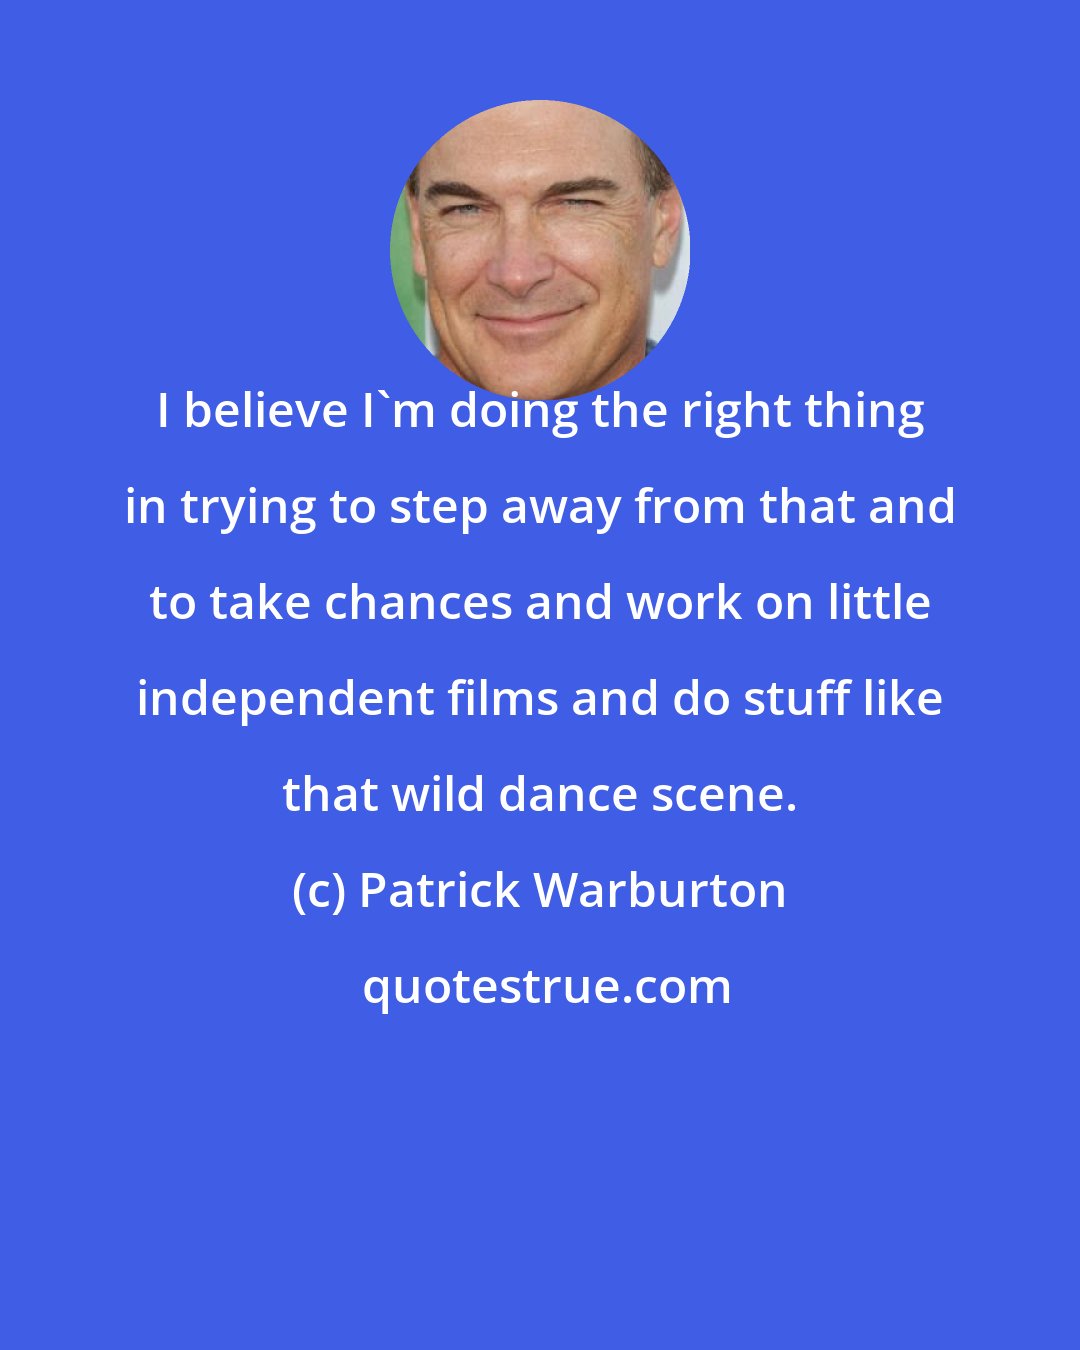 Patrick Warburton: I believe I'm doing the right thing in trying to step away from that and to take chances and work on little independent films and do stuff like that wild dance scene.